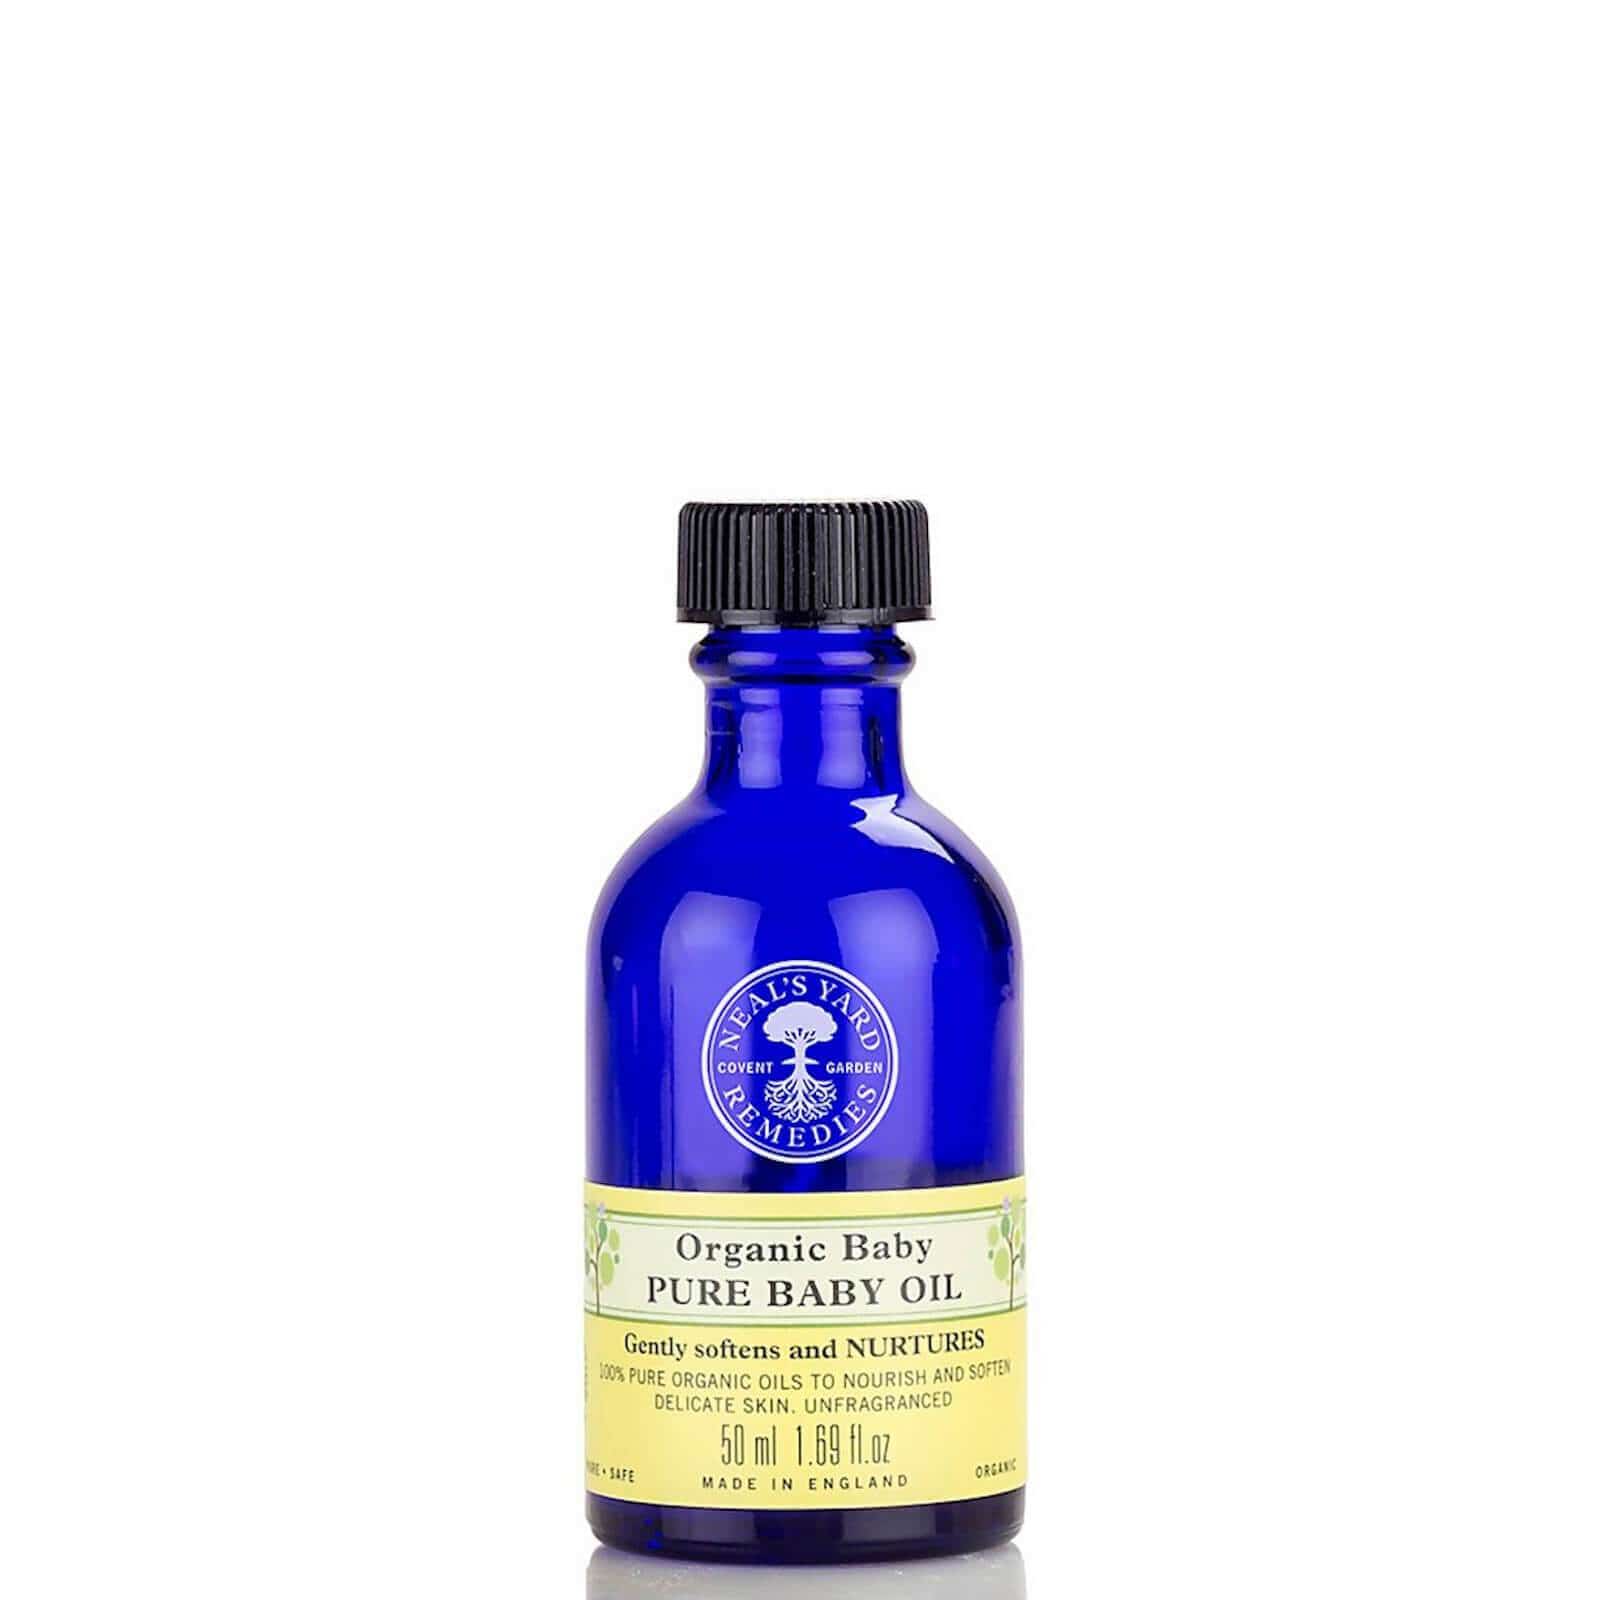 Organic Baby Massage Oil by Neal's Yard Remedies - Bumbles & Boo